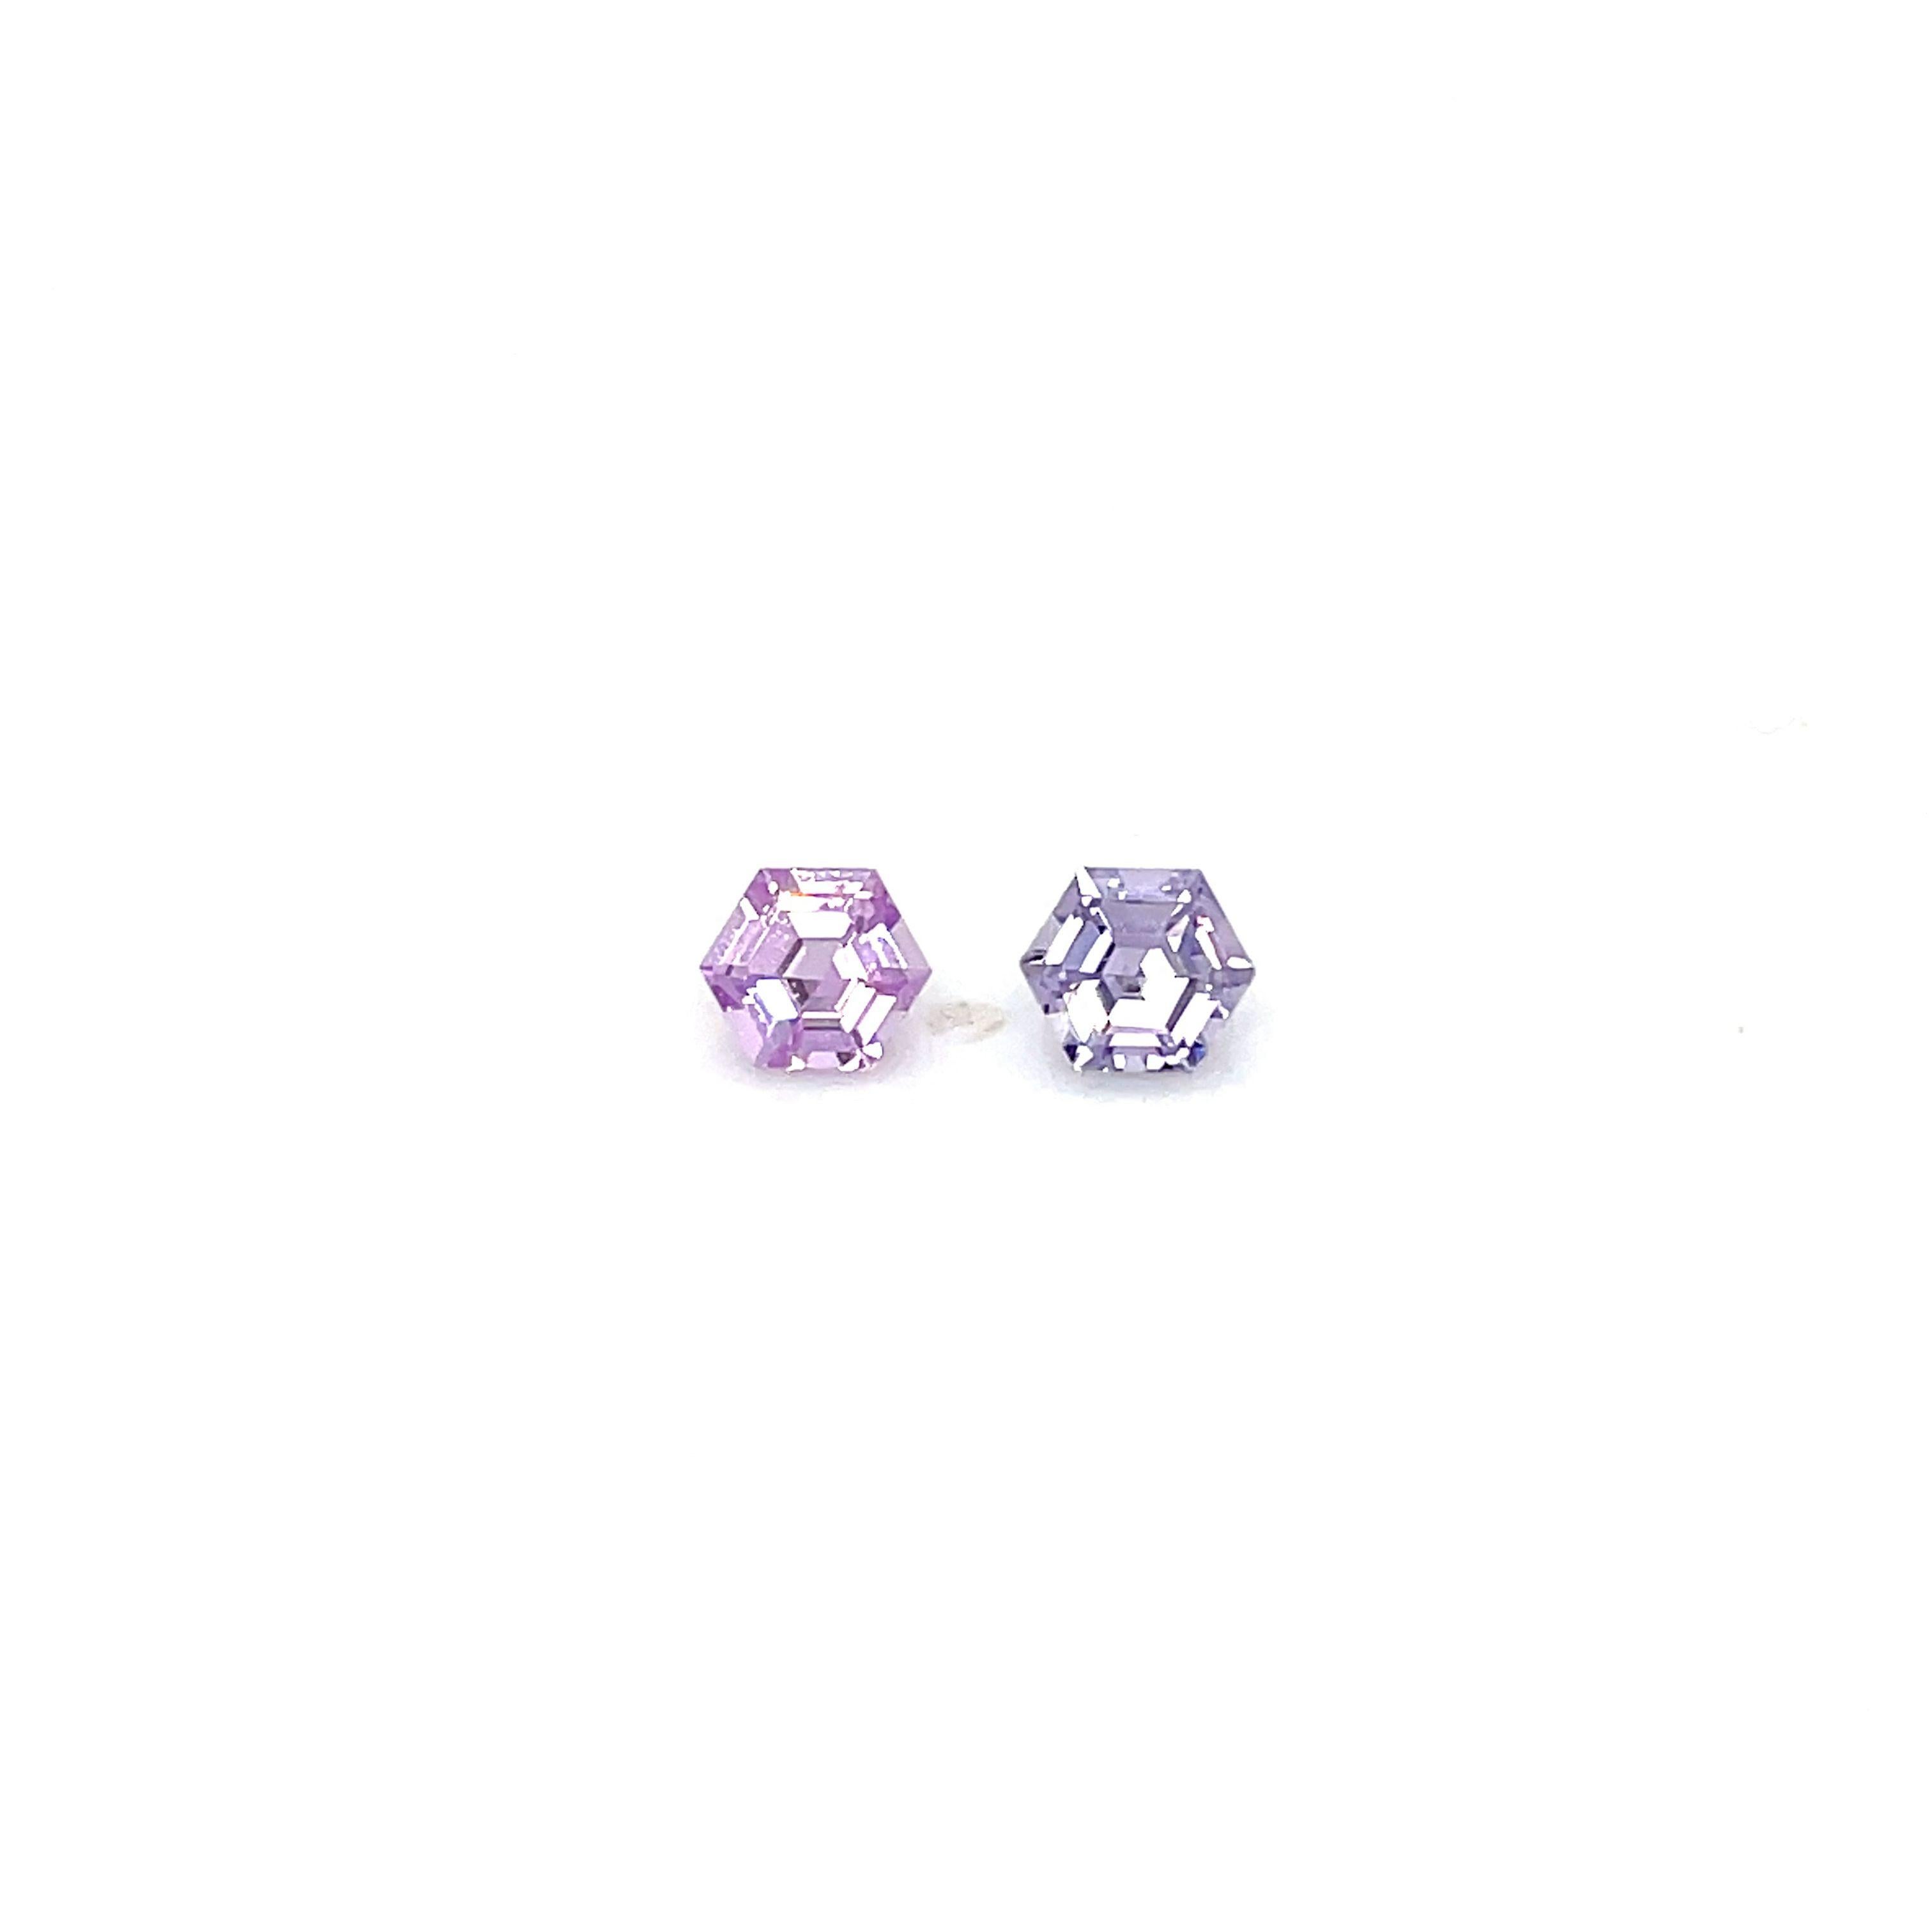 Square Cut Hexagon Pink and Light Pink Sapphires Cts 1.58 For Sale